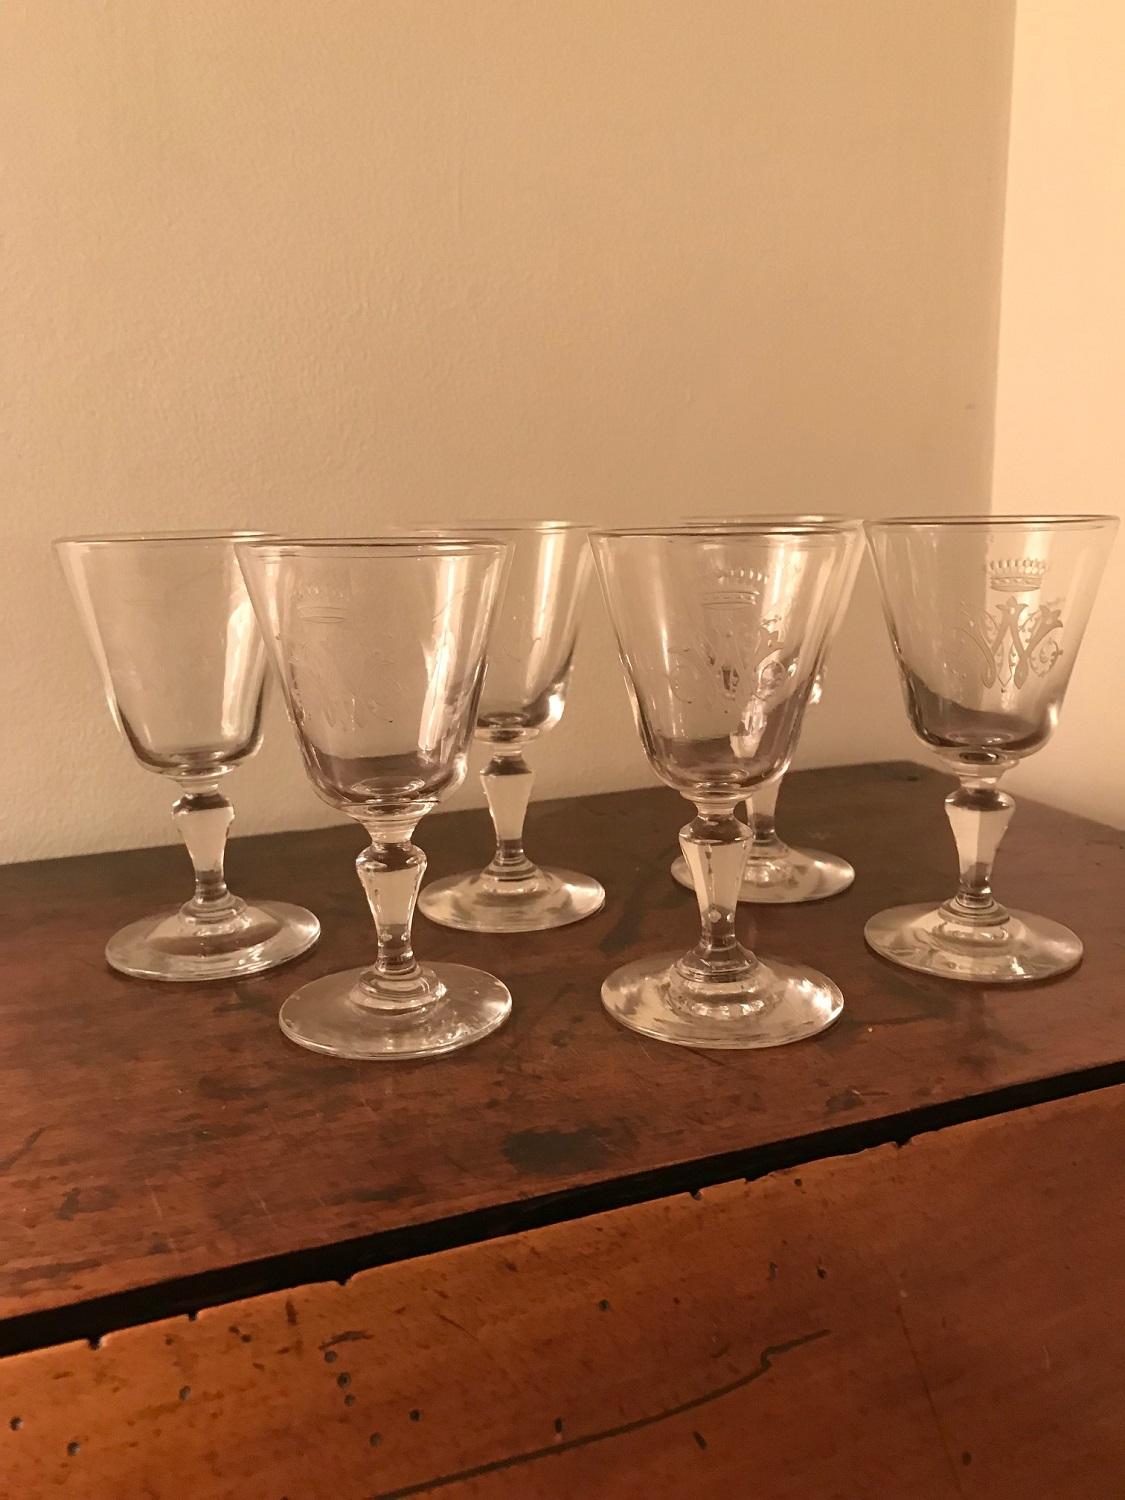 French 19th Century Crystal Liquor or Liqueur Glasses For Sale 6